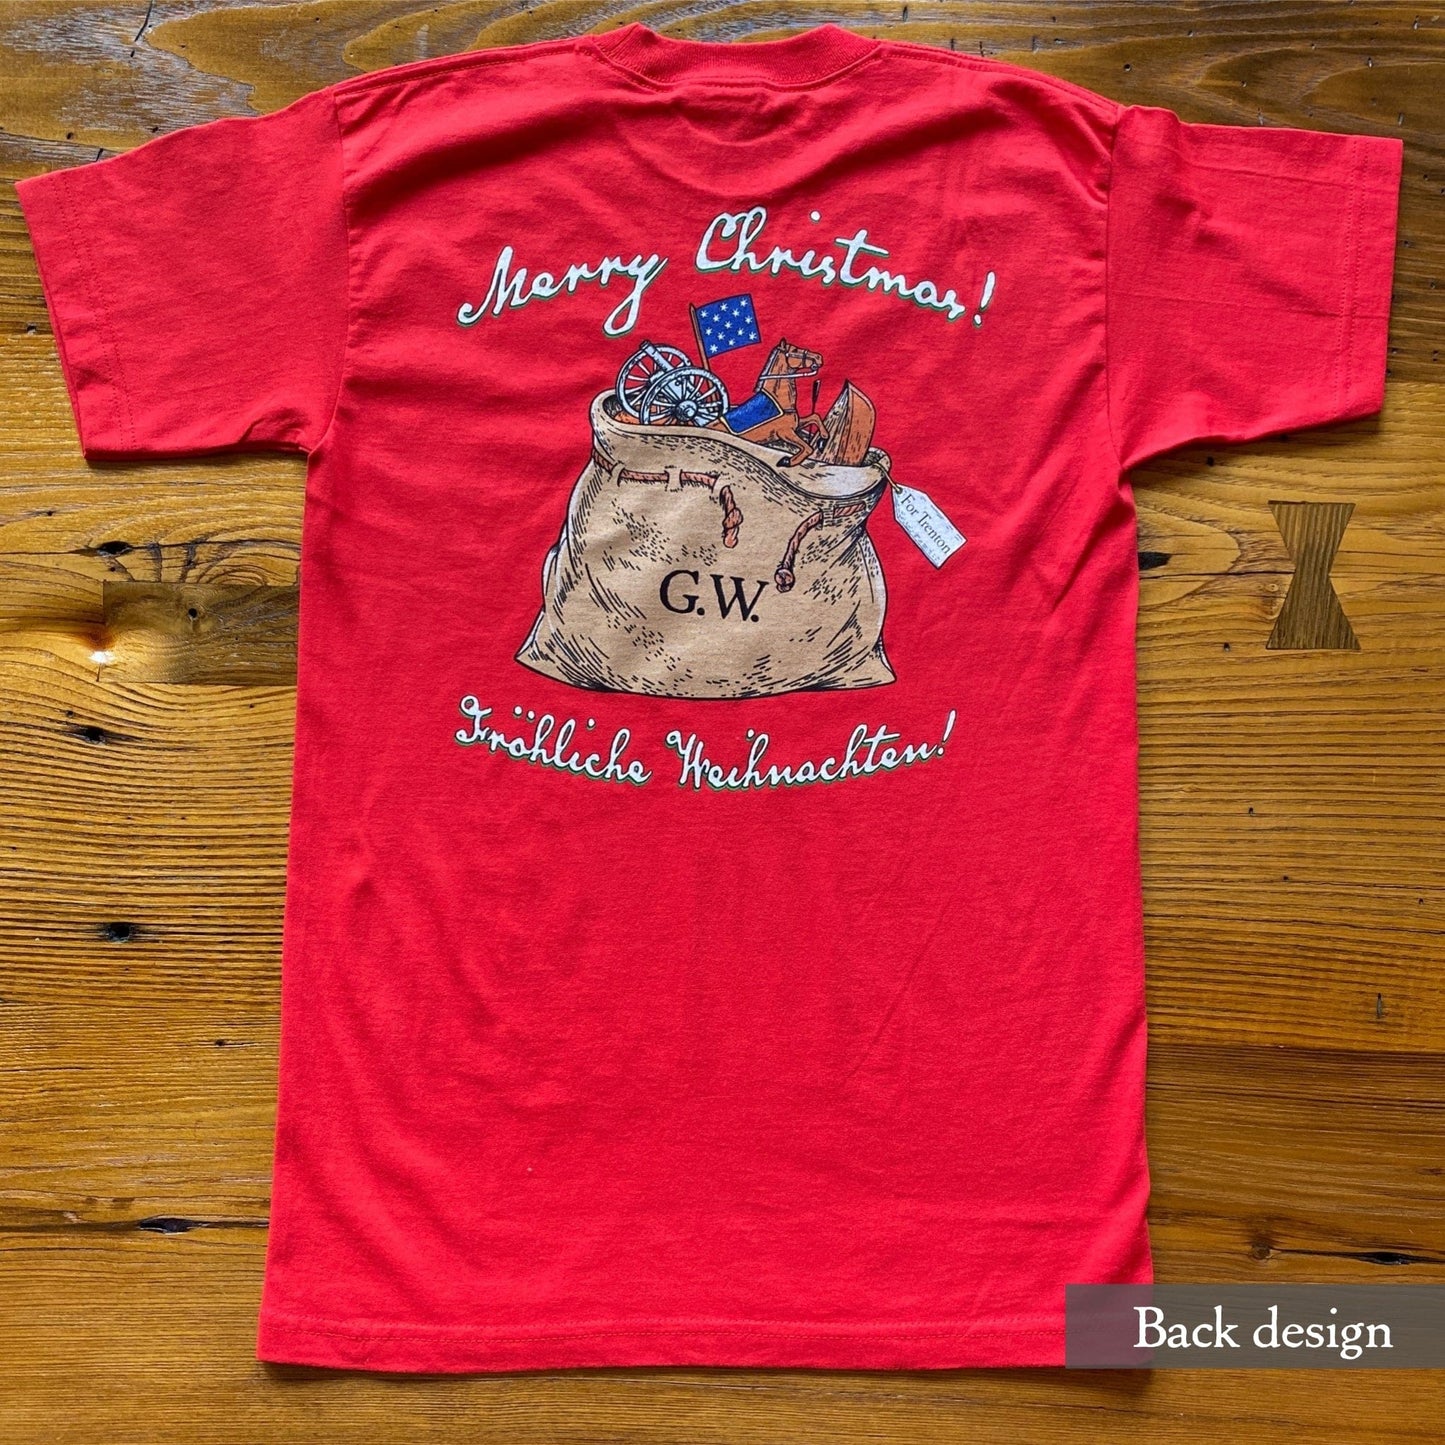 George Washington's Christmas Day Crossing of the Delaware Made in America Shirt — The Christmas shirt for history nerds